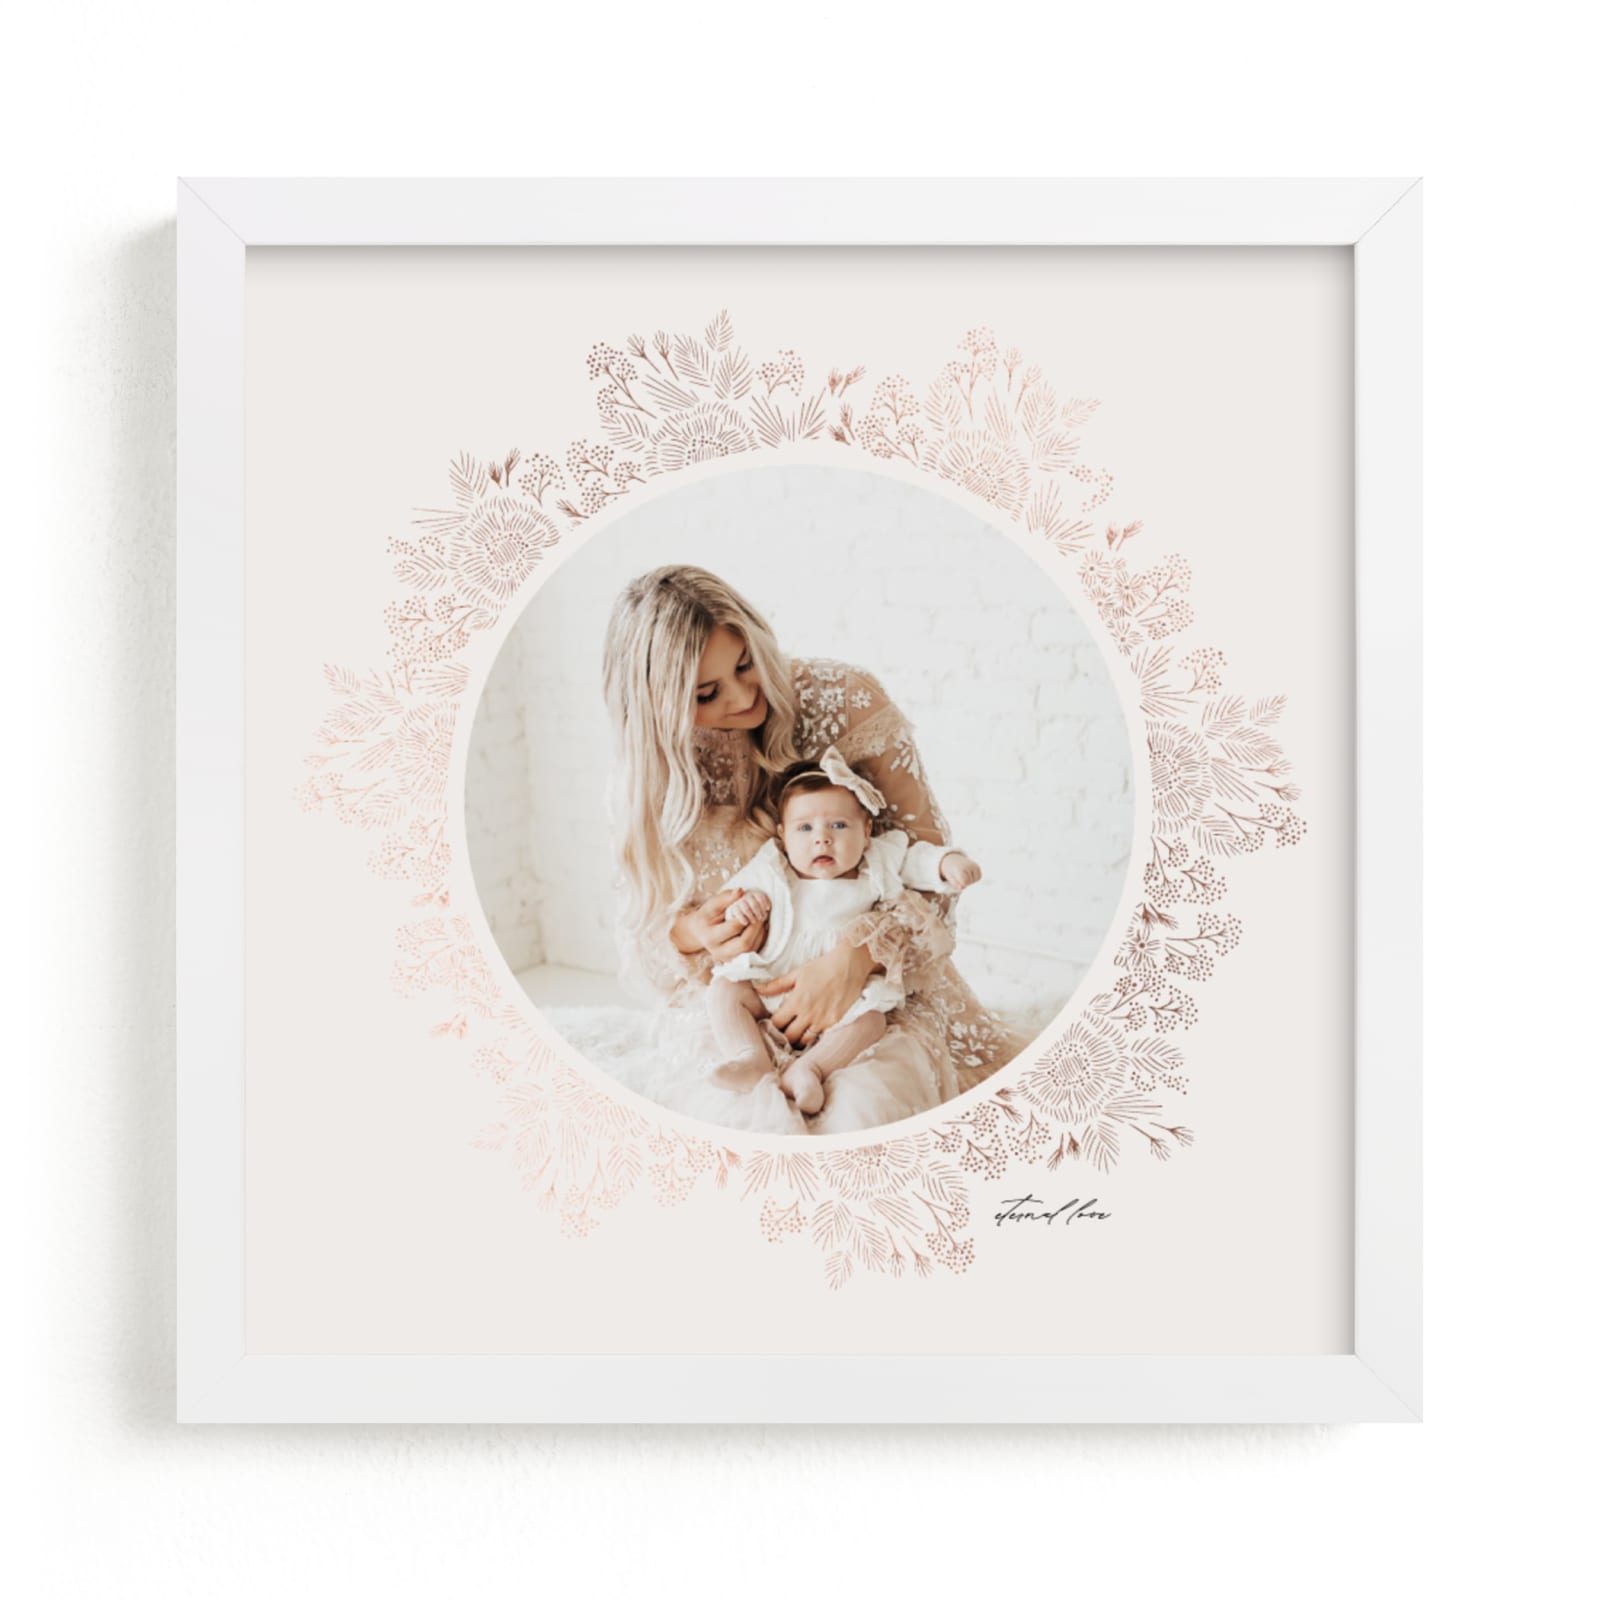 This is a ivory, rosegold foil stamped photo art by Tamara Hilje called Gilded Blooms.